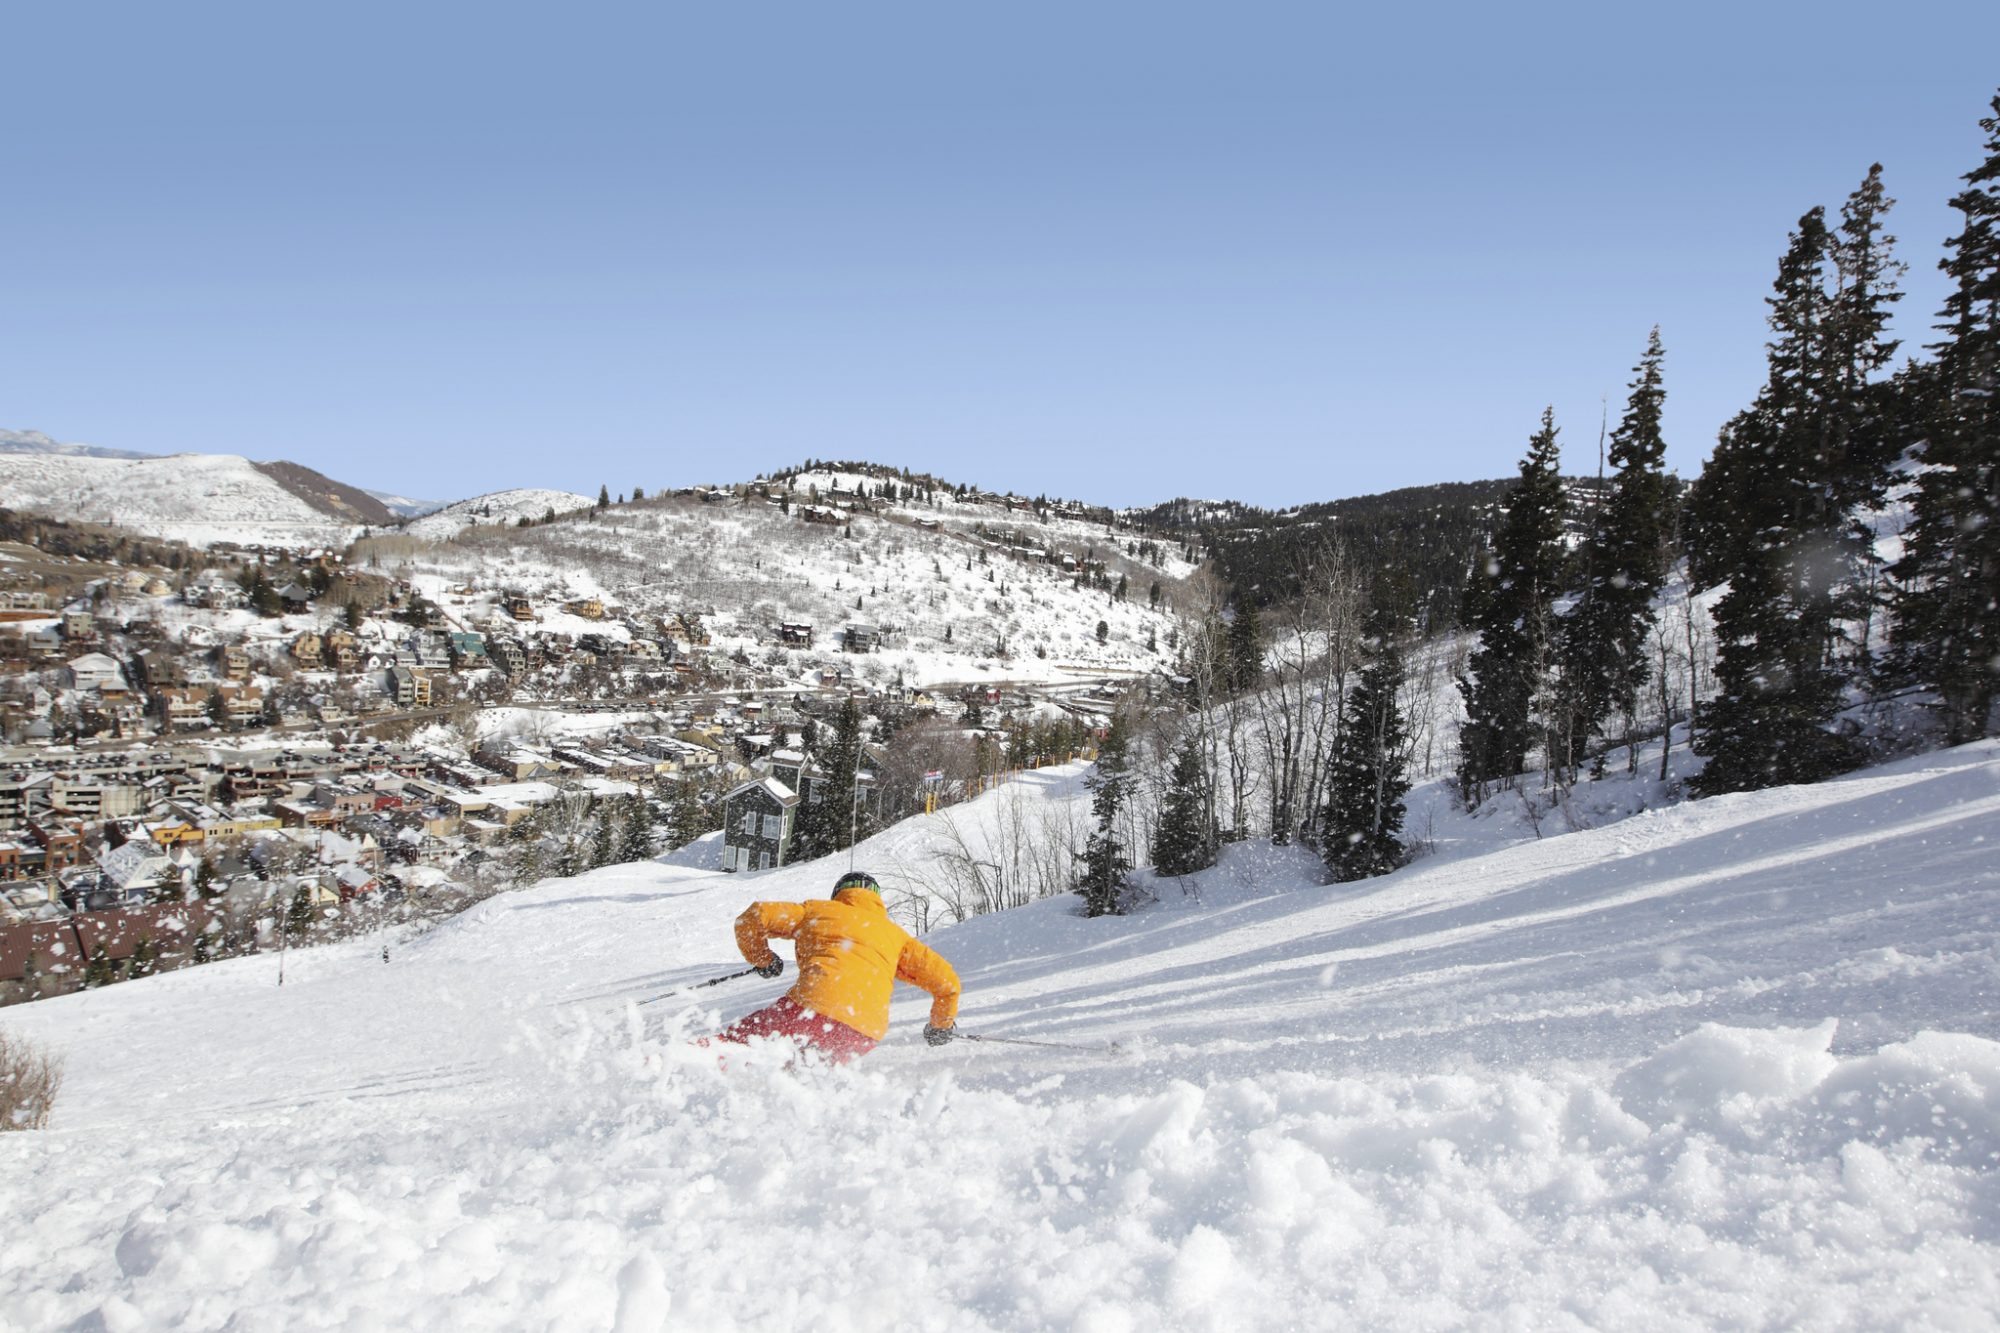 Park City Mountain Announces Plans to Install New Lift for 2019-20 SEASON. Photo Vail Resorts.